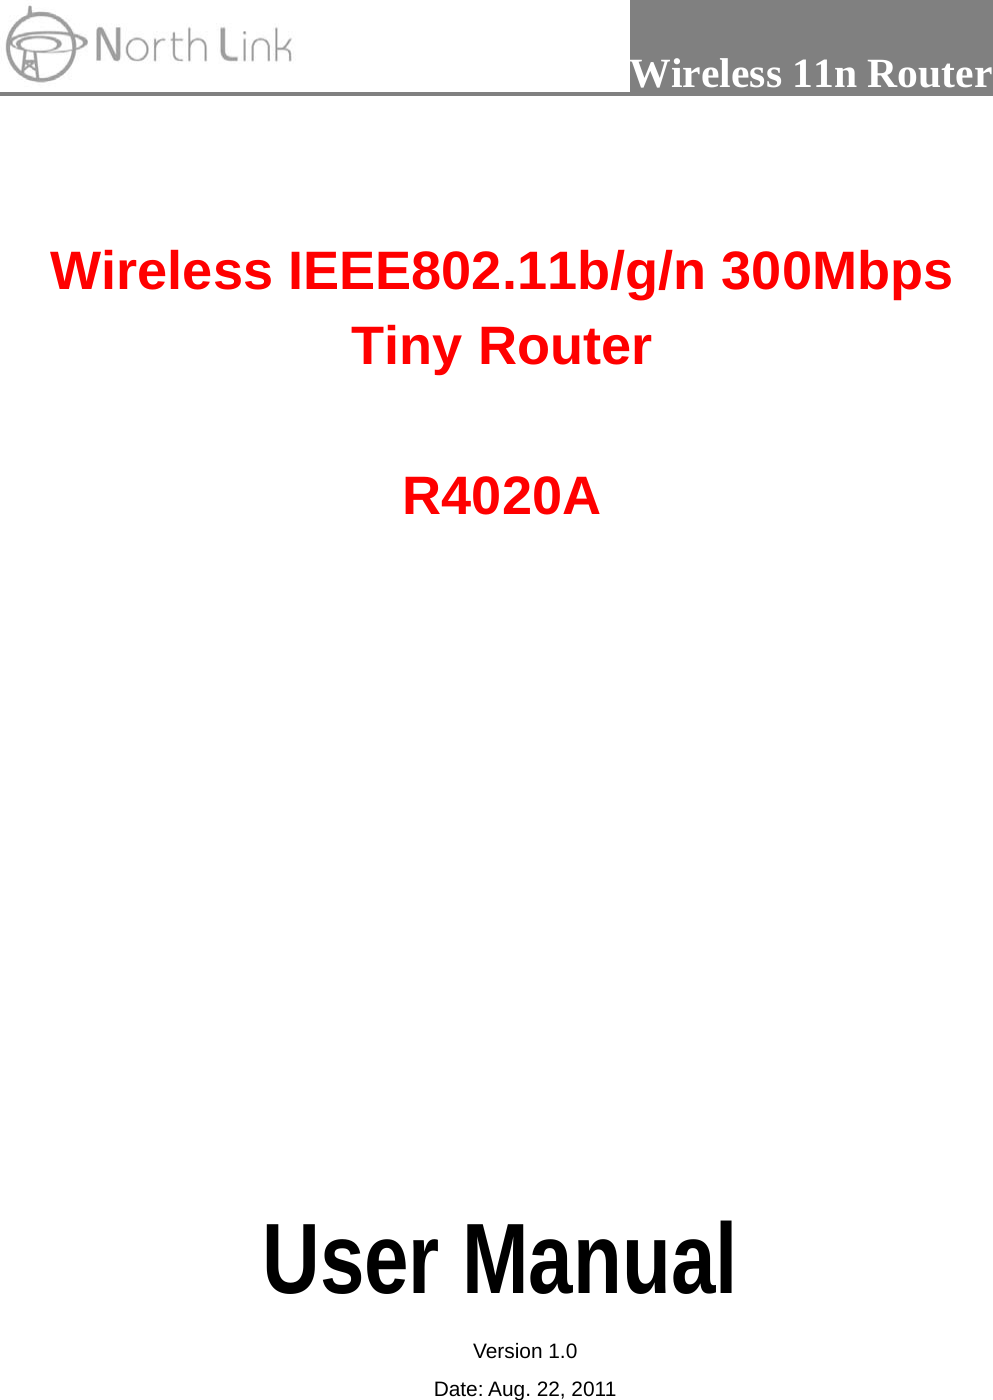                 Wireless 11n Router    Wireless IEEE802.11b/g/n 300Mbps Tiny Router  R4020A               User Manual Version 1.0 Date: Aug. 22, 2011 